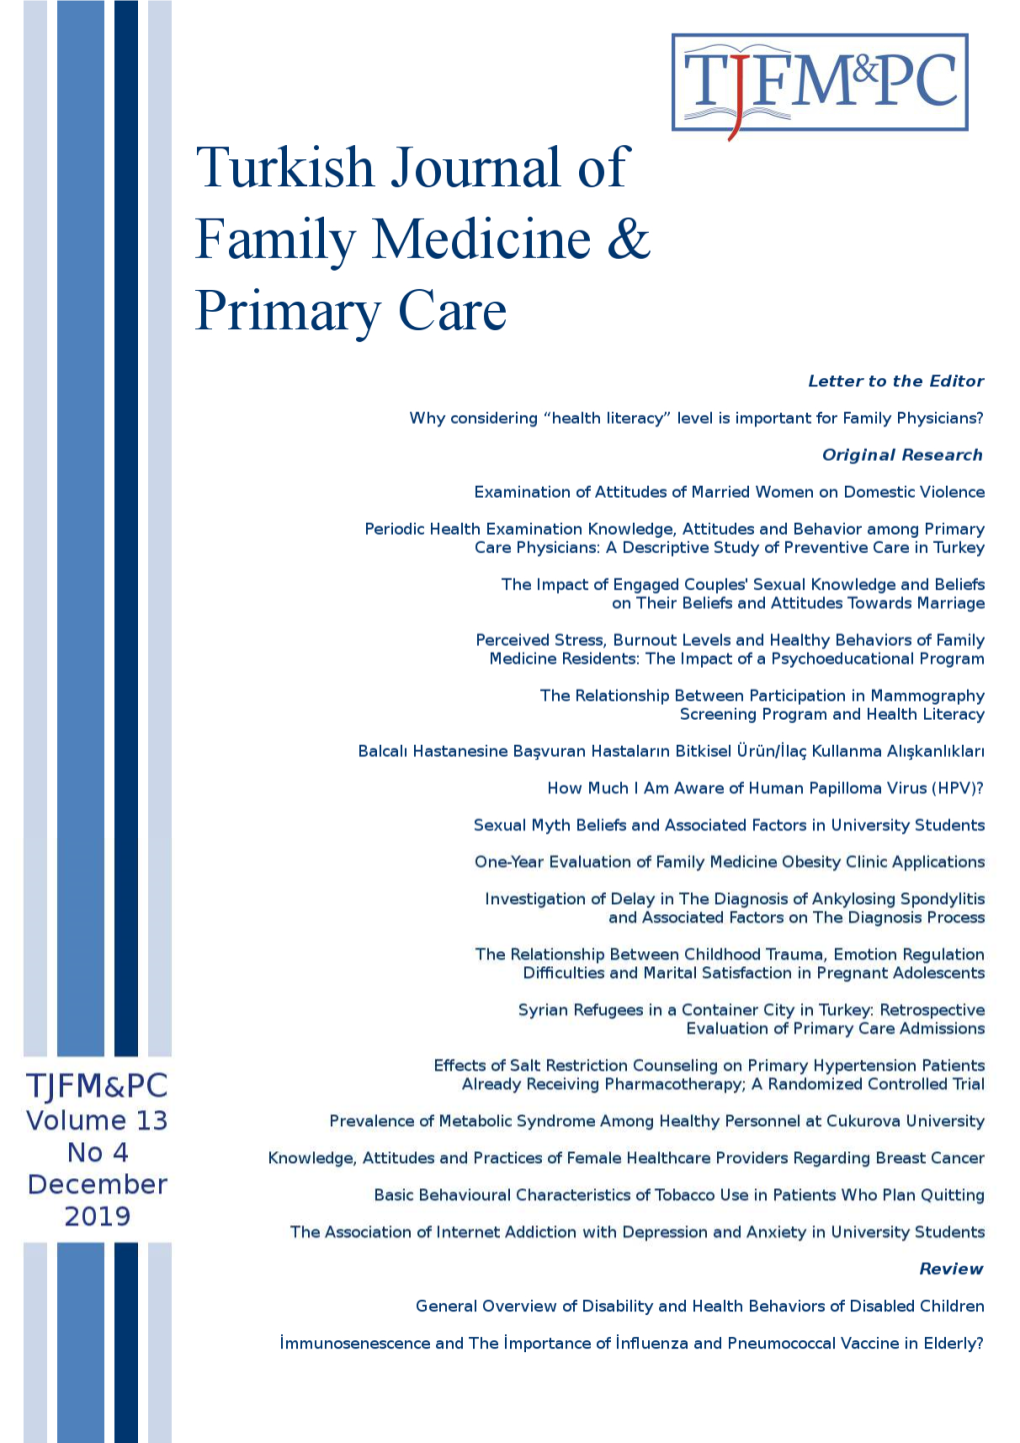 The Turkish Journal of Family Medicine and Primary Care (TJFMPC) Is Published Online 4 Times a Year; March, June, September and December